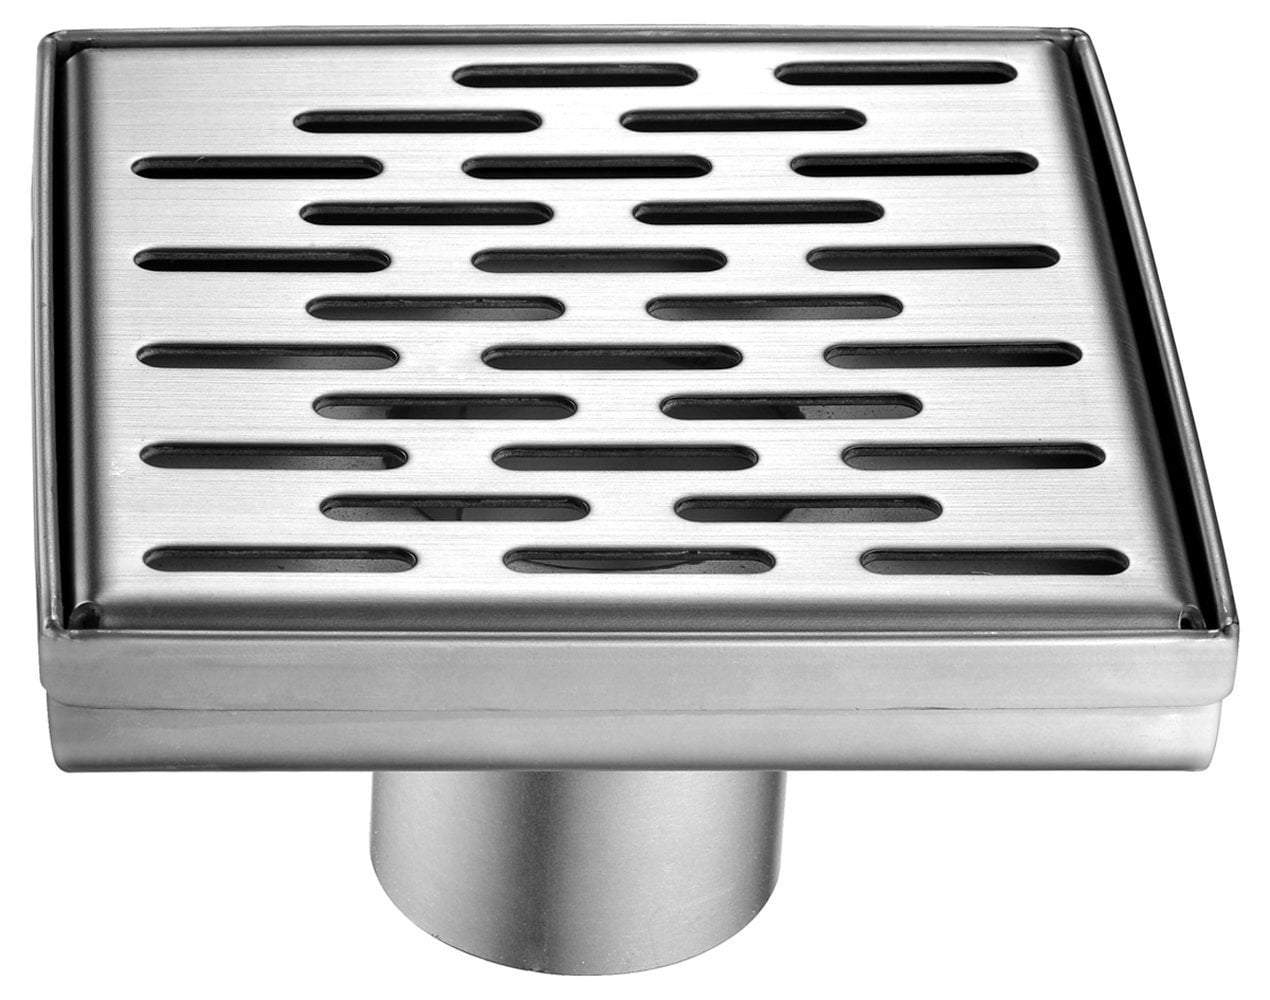 5" x 5" Modern Square Stainless Steel Shower Drain with Groove Holes